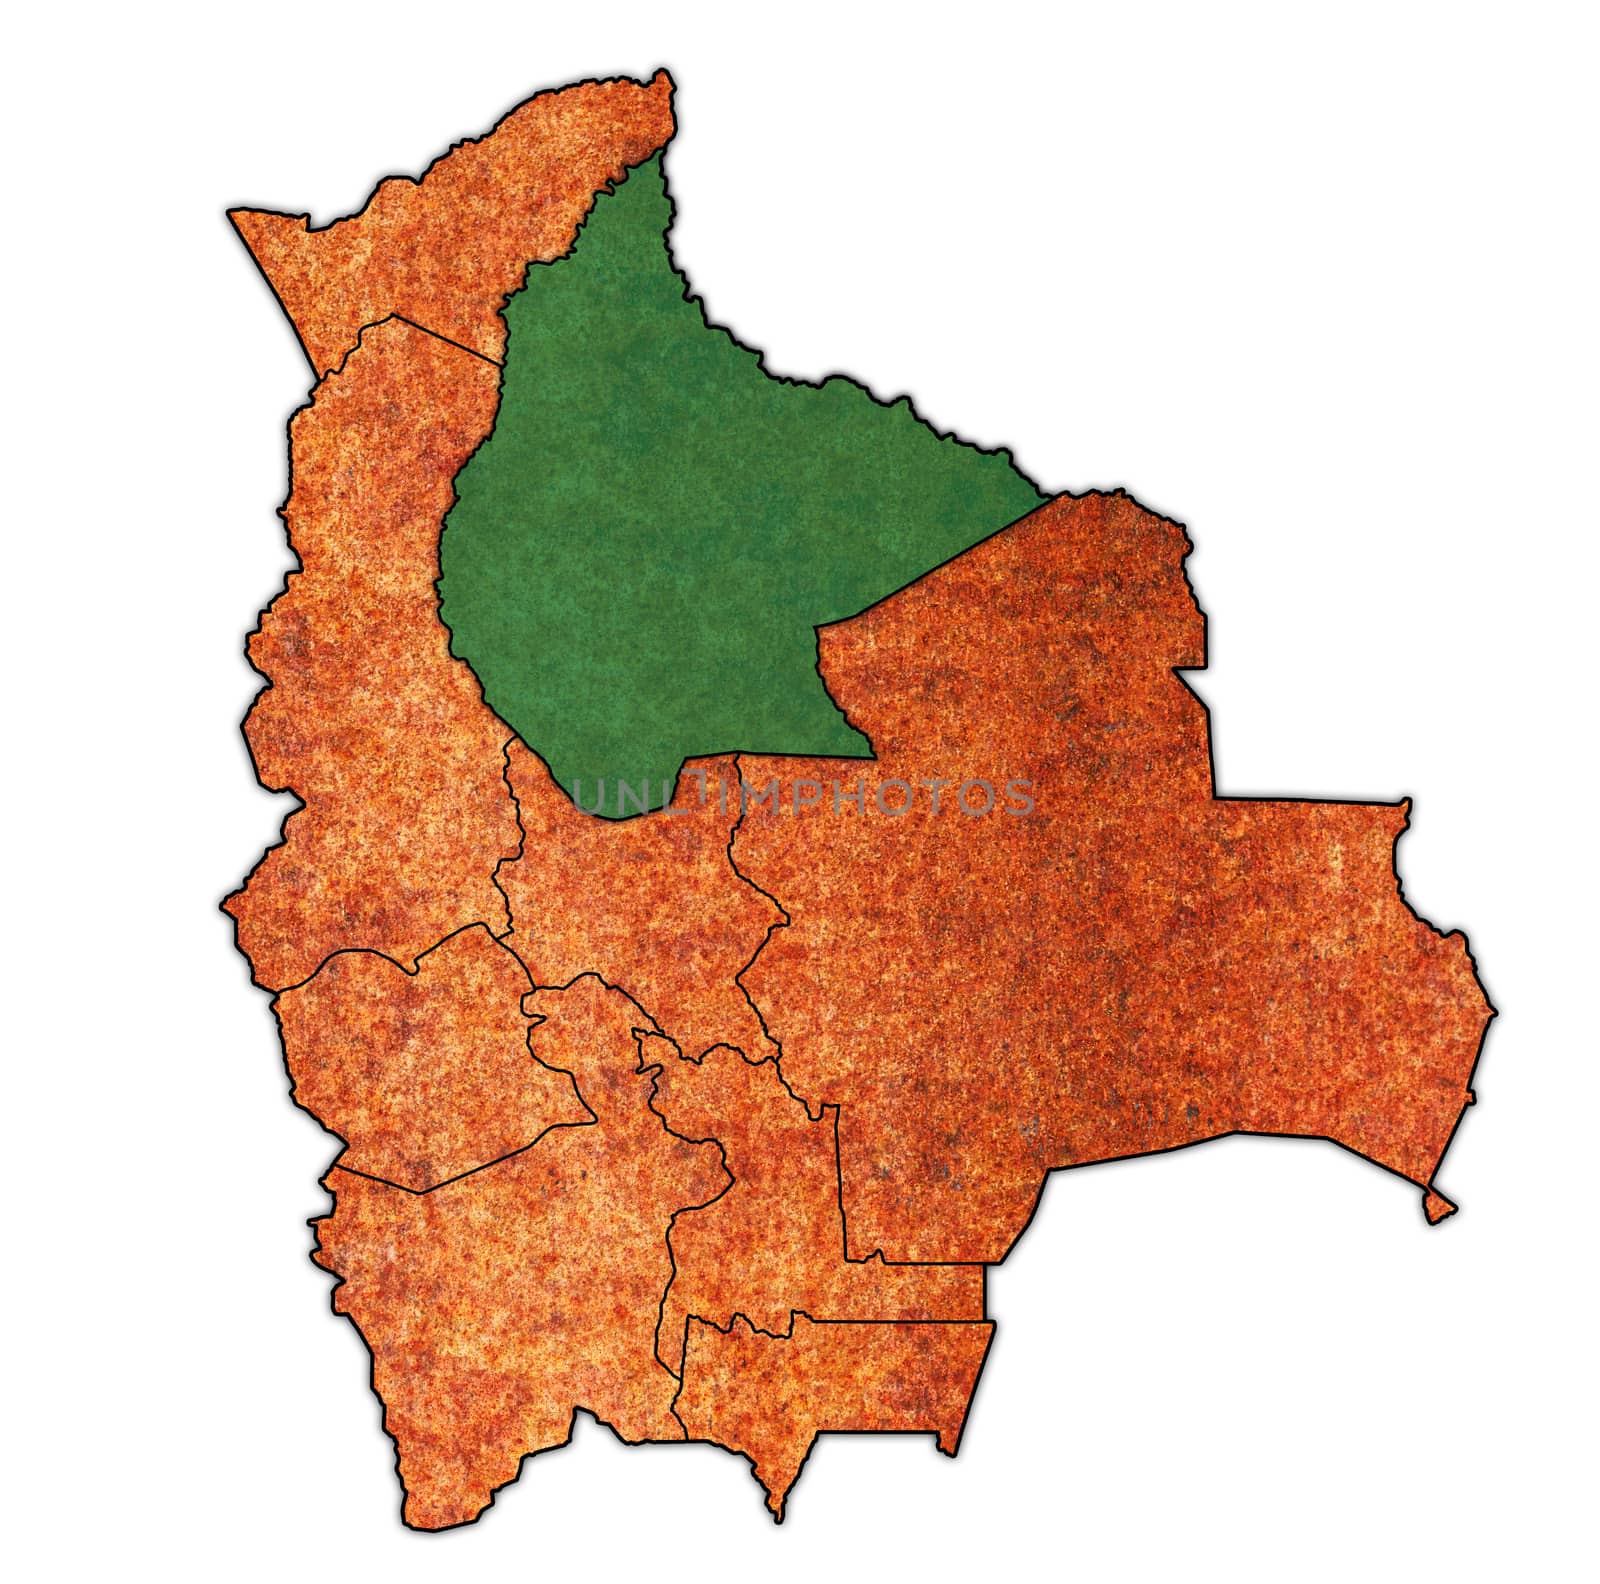 territory and flag of Beni region on map with administrative divisions and borders of Bolivia with clipping path